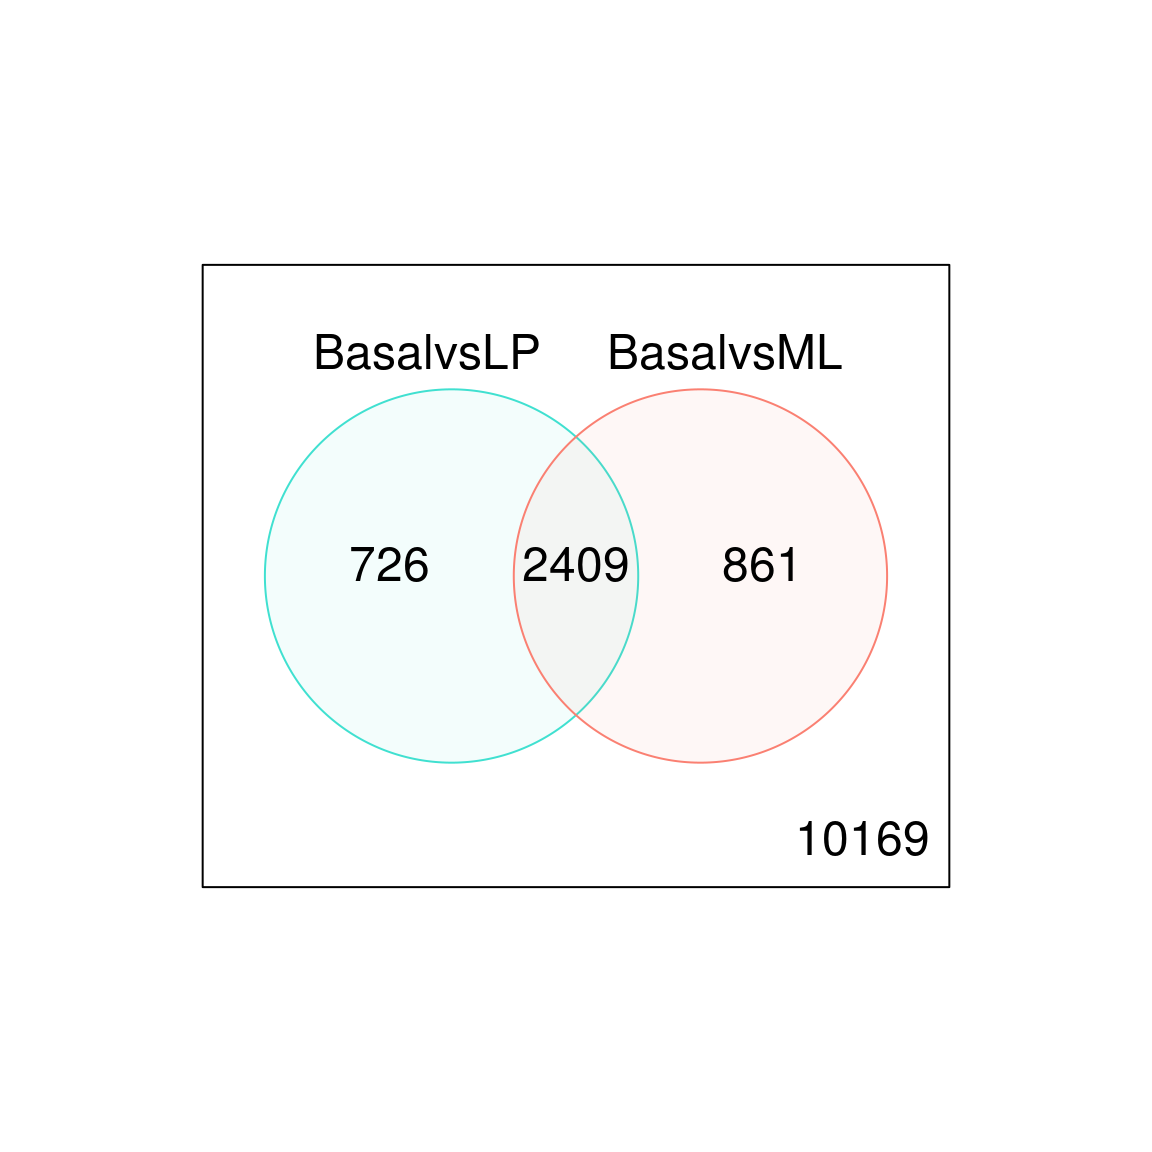 Venn diagram showing the number of genes DE in the comparison between basal versus LP only (left), basal versus ML only (right), and the number of genes that are DE in both comparisons (center). The number of genes that are not DE in either comparison are marked in the bottom-right.